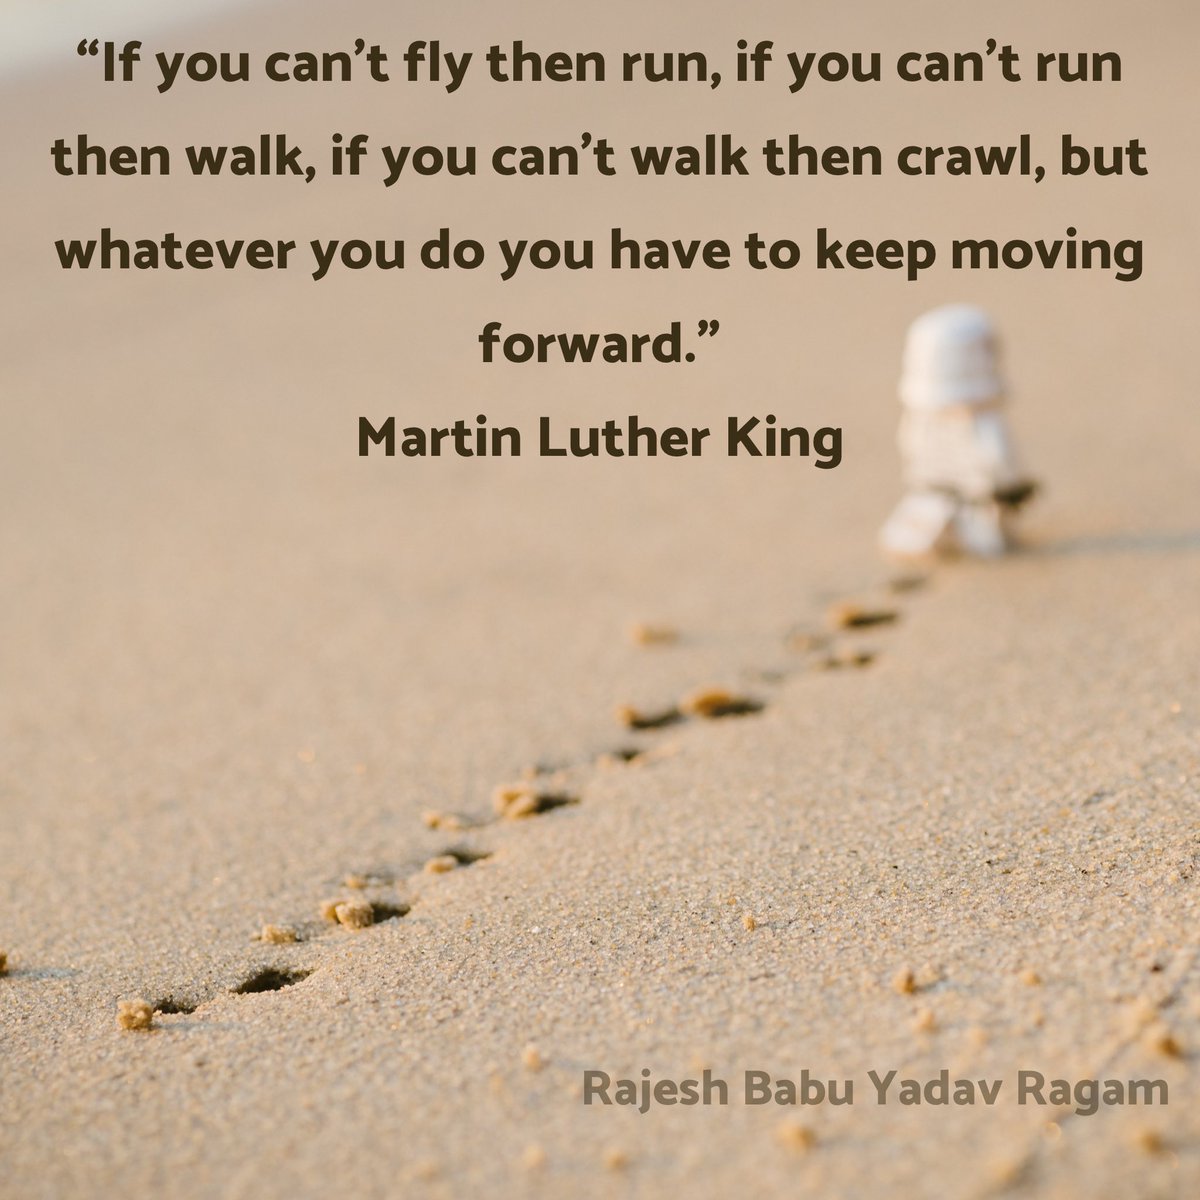 “If you can't fly then run, if you can't run then walk, if you can't walk then crawl, but whatever you do you have to keep moving forward.”— Martin Luther King, Jr. #MartinLutherKing Rajesh Babu Yadav Ragam #rajeshbabuyadavragam #rajeshragam #RR @RajeshBabuYadav